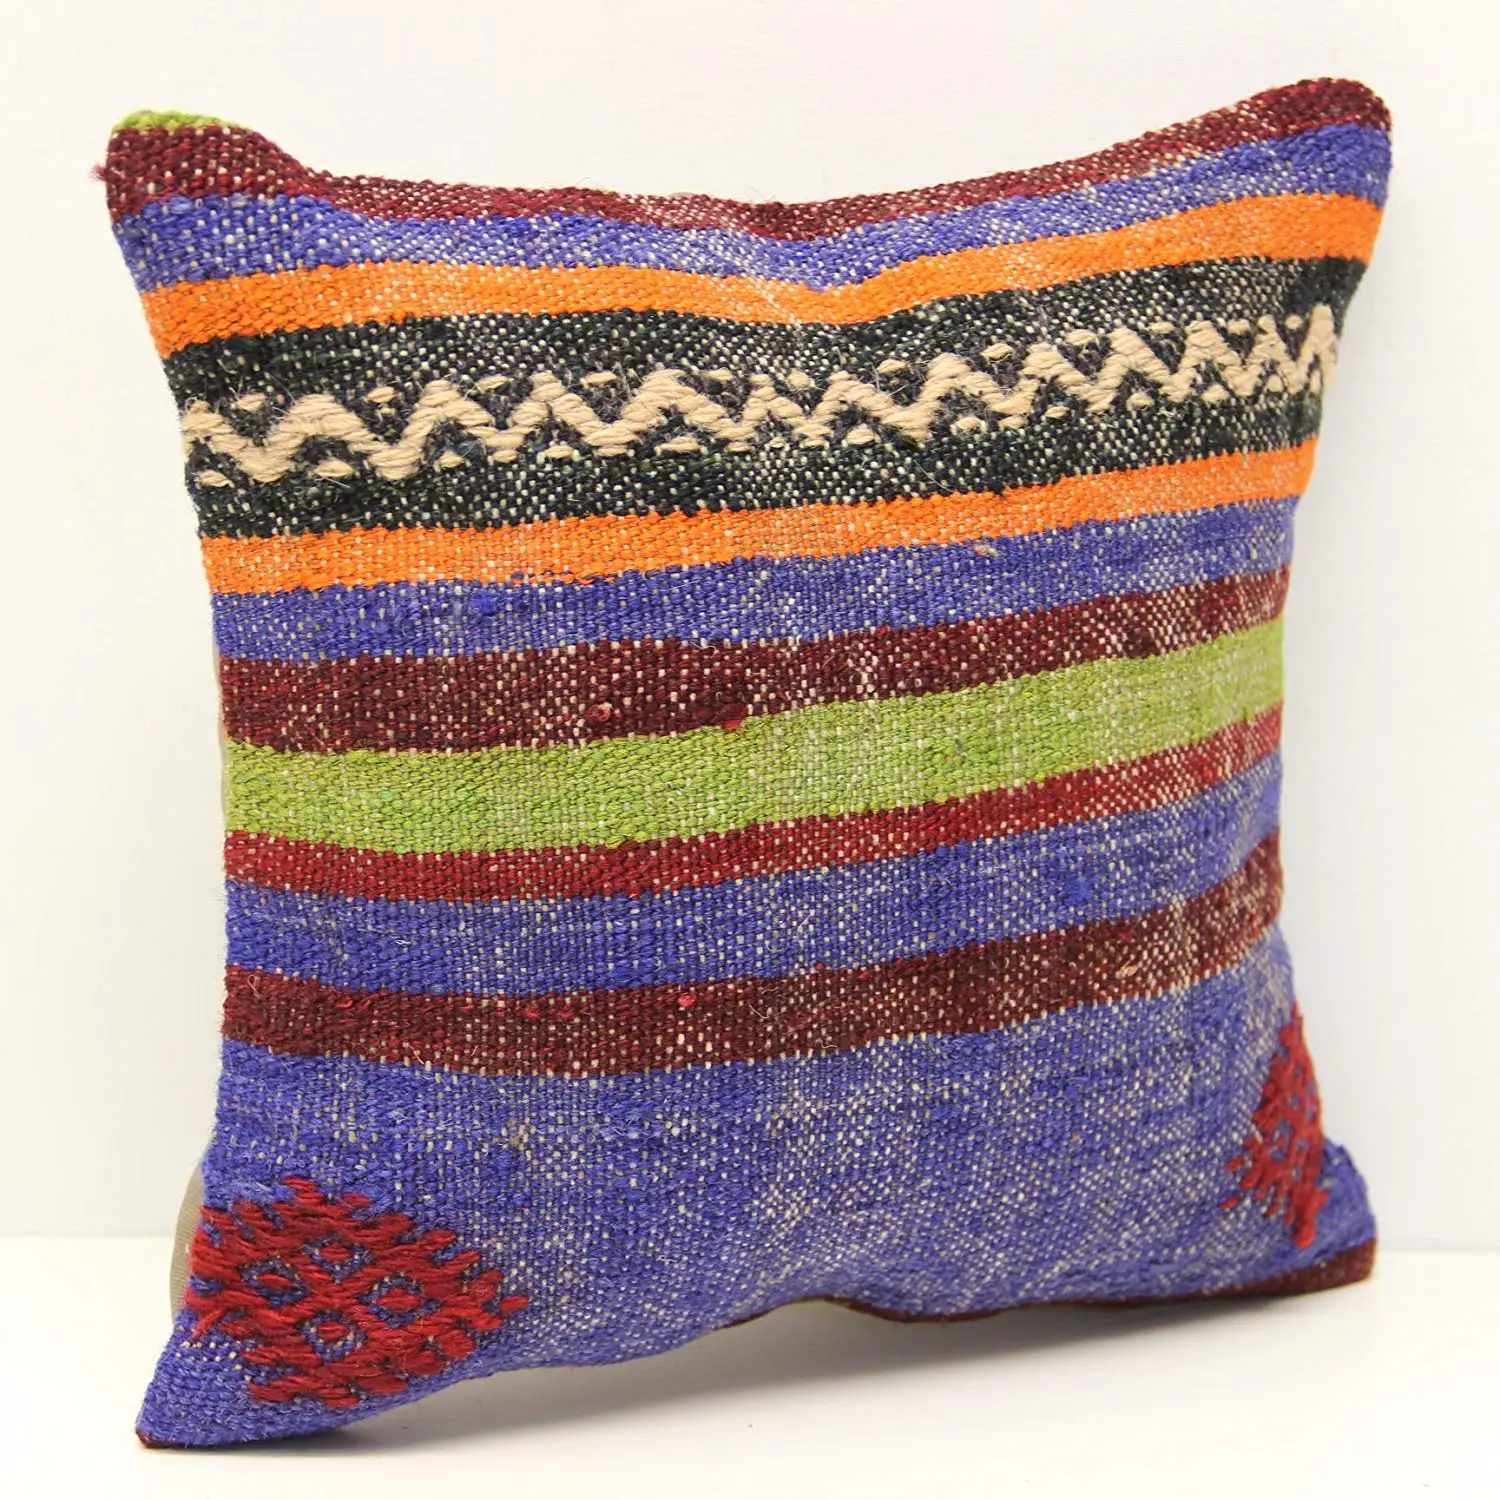 Cheap 12x12 Pillow Cover, find 12x12 Pillow Cover deals on line at